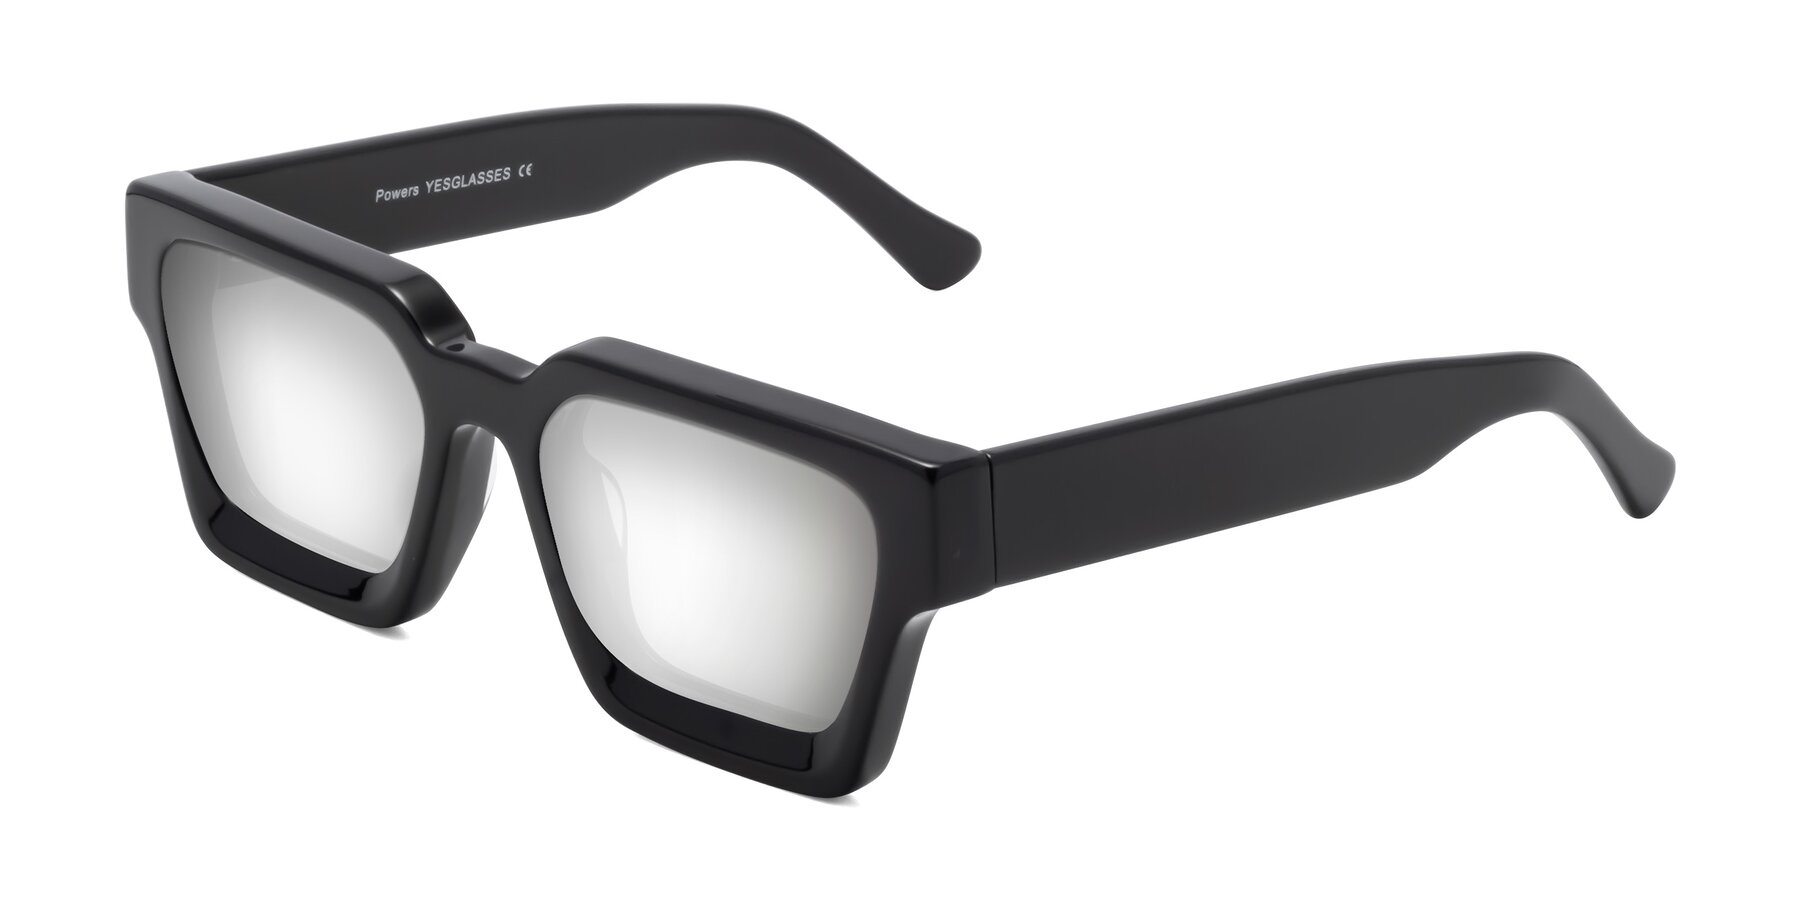 Angle of Powers in Black with Silver Mirrored Lenses